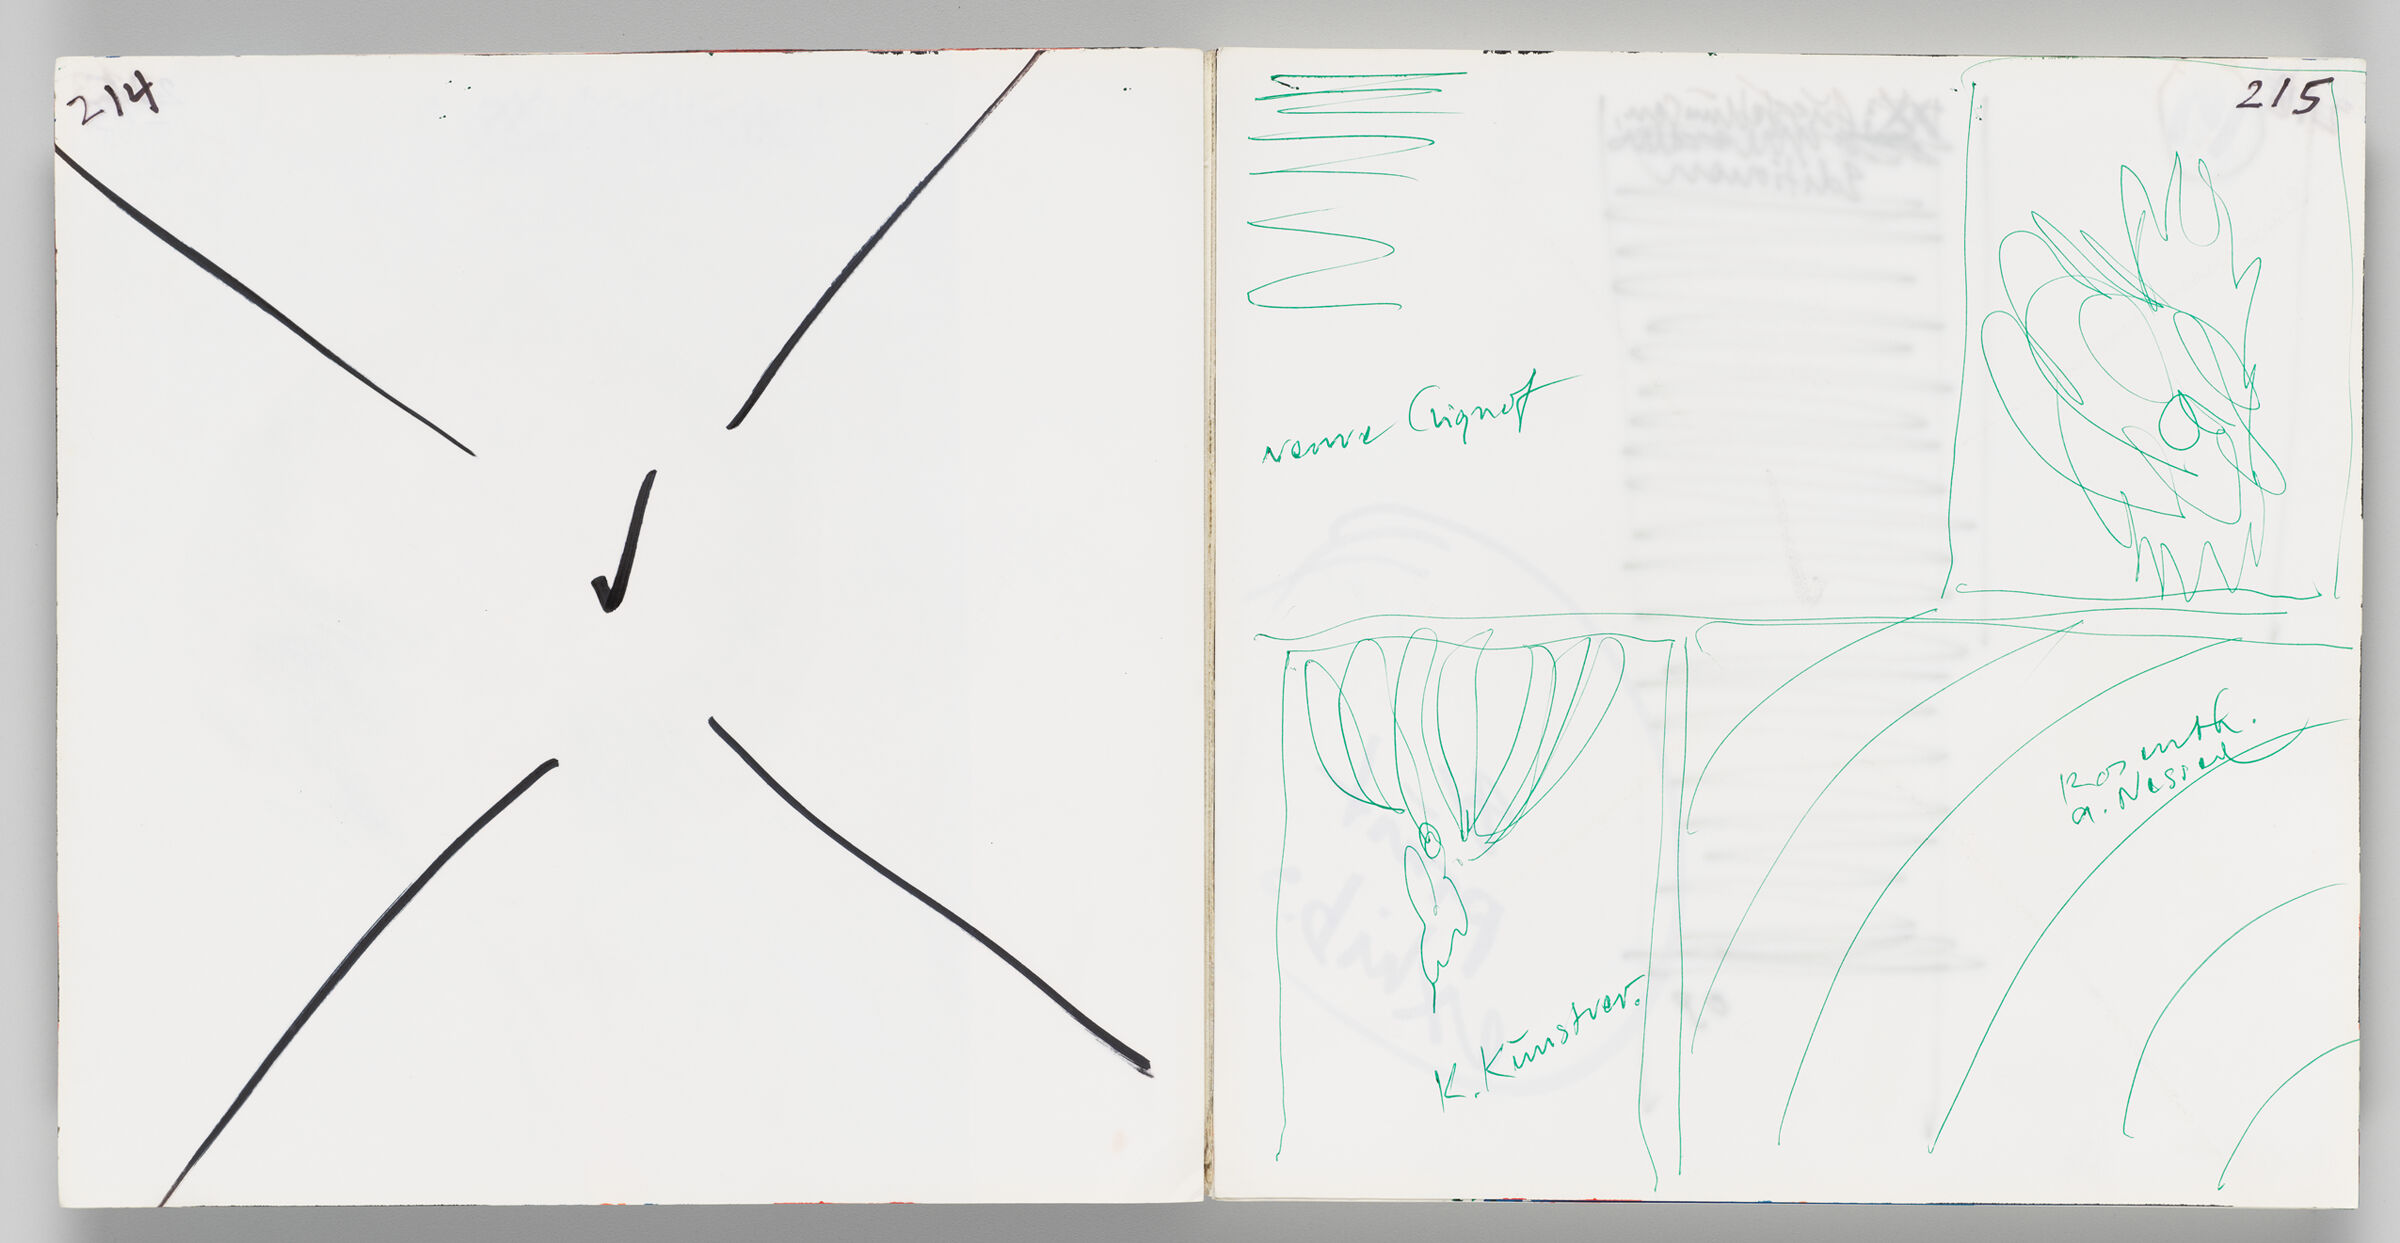 Untitled (Lines And Checkmark, Left Page); Untitled (Pen Sketches, Right Page)